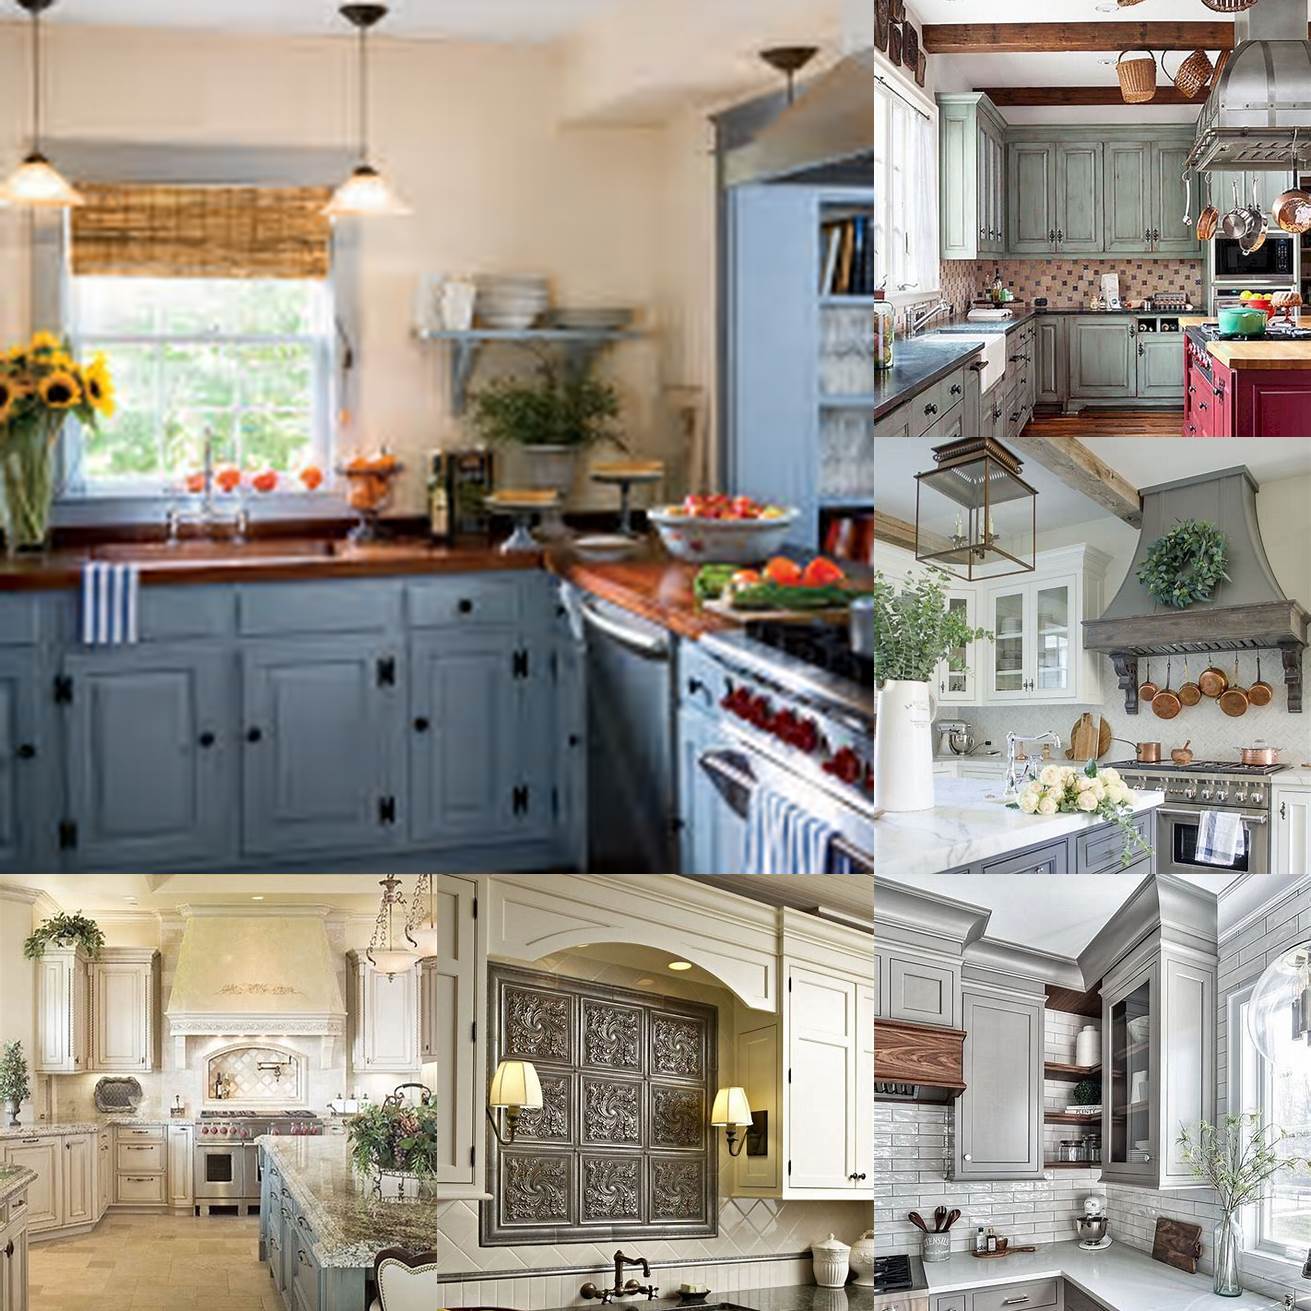 2 French Country - A romantic kitchen with painted cabinets a farmhouse sink and a stone backsplash The wrought iron chandelier and vintage rug add elegance and charm